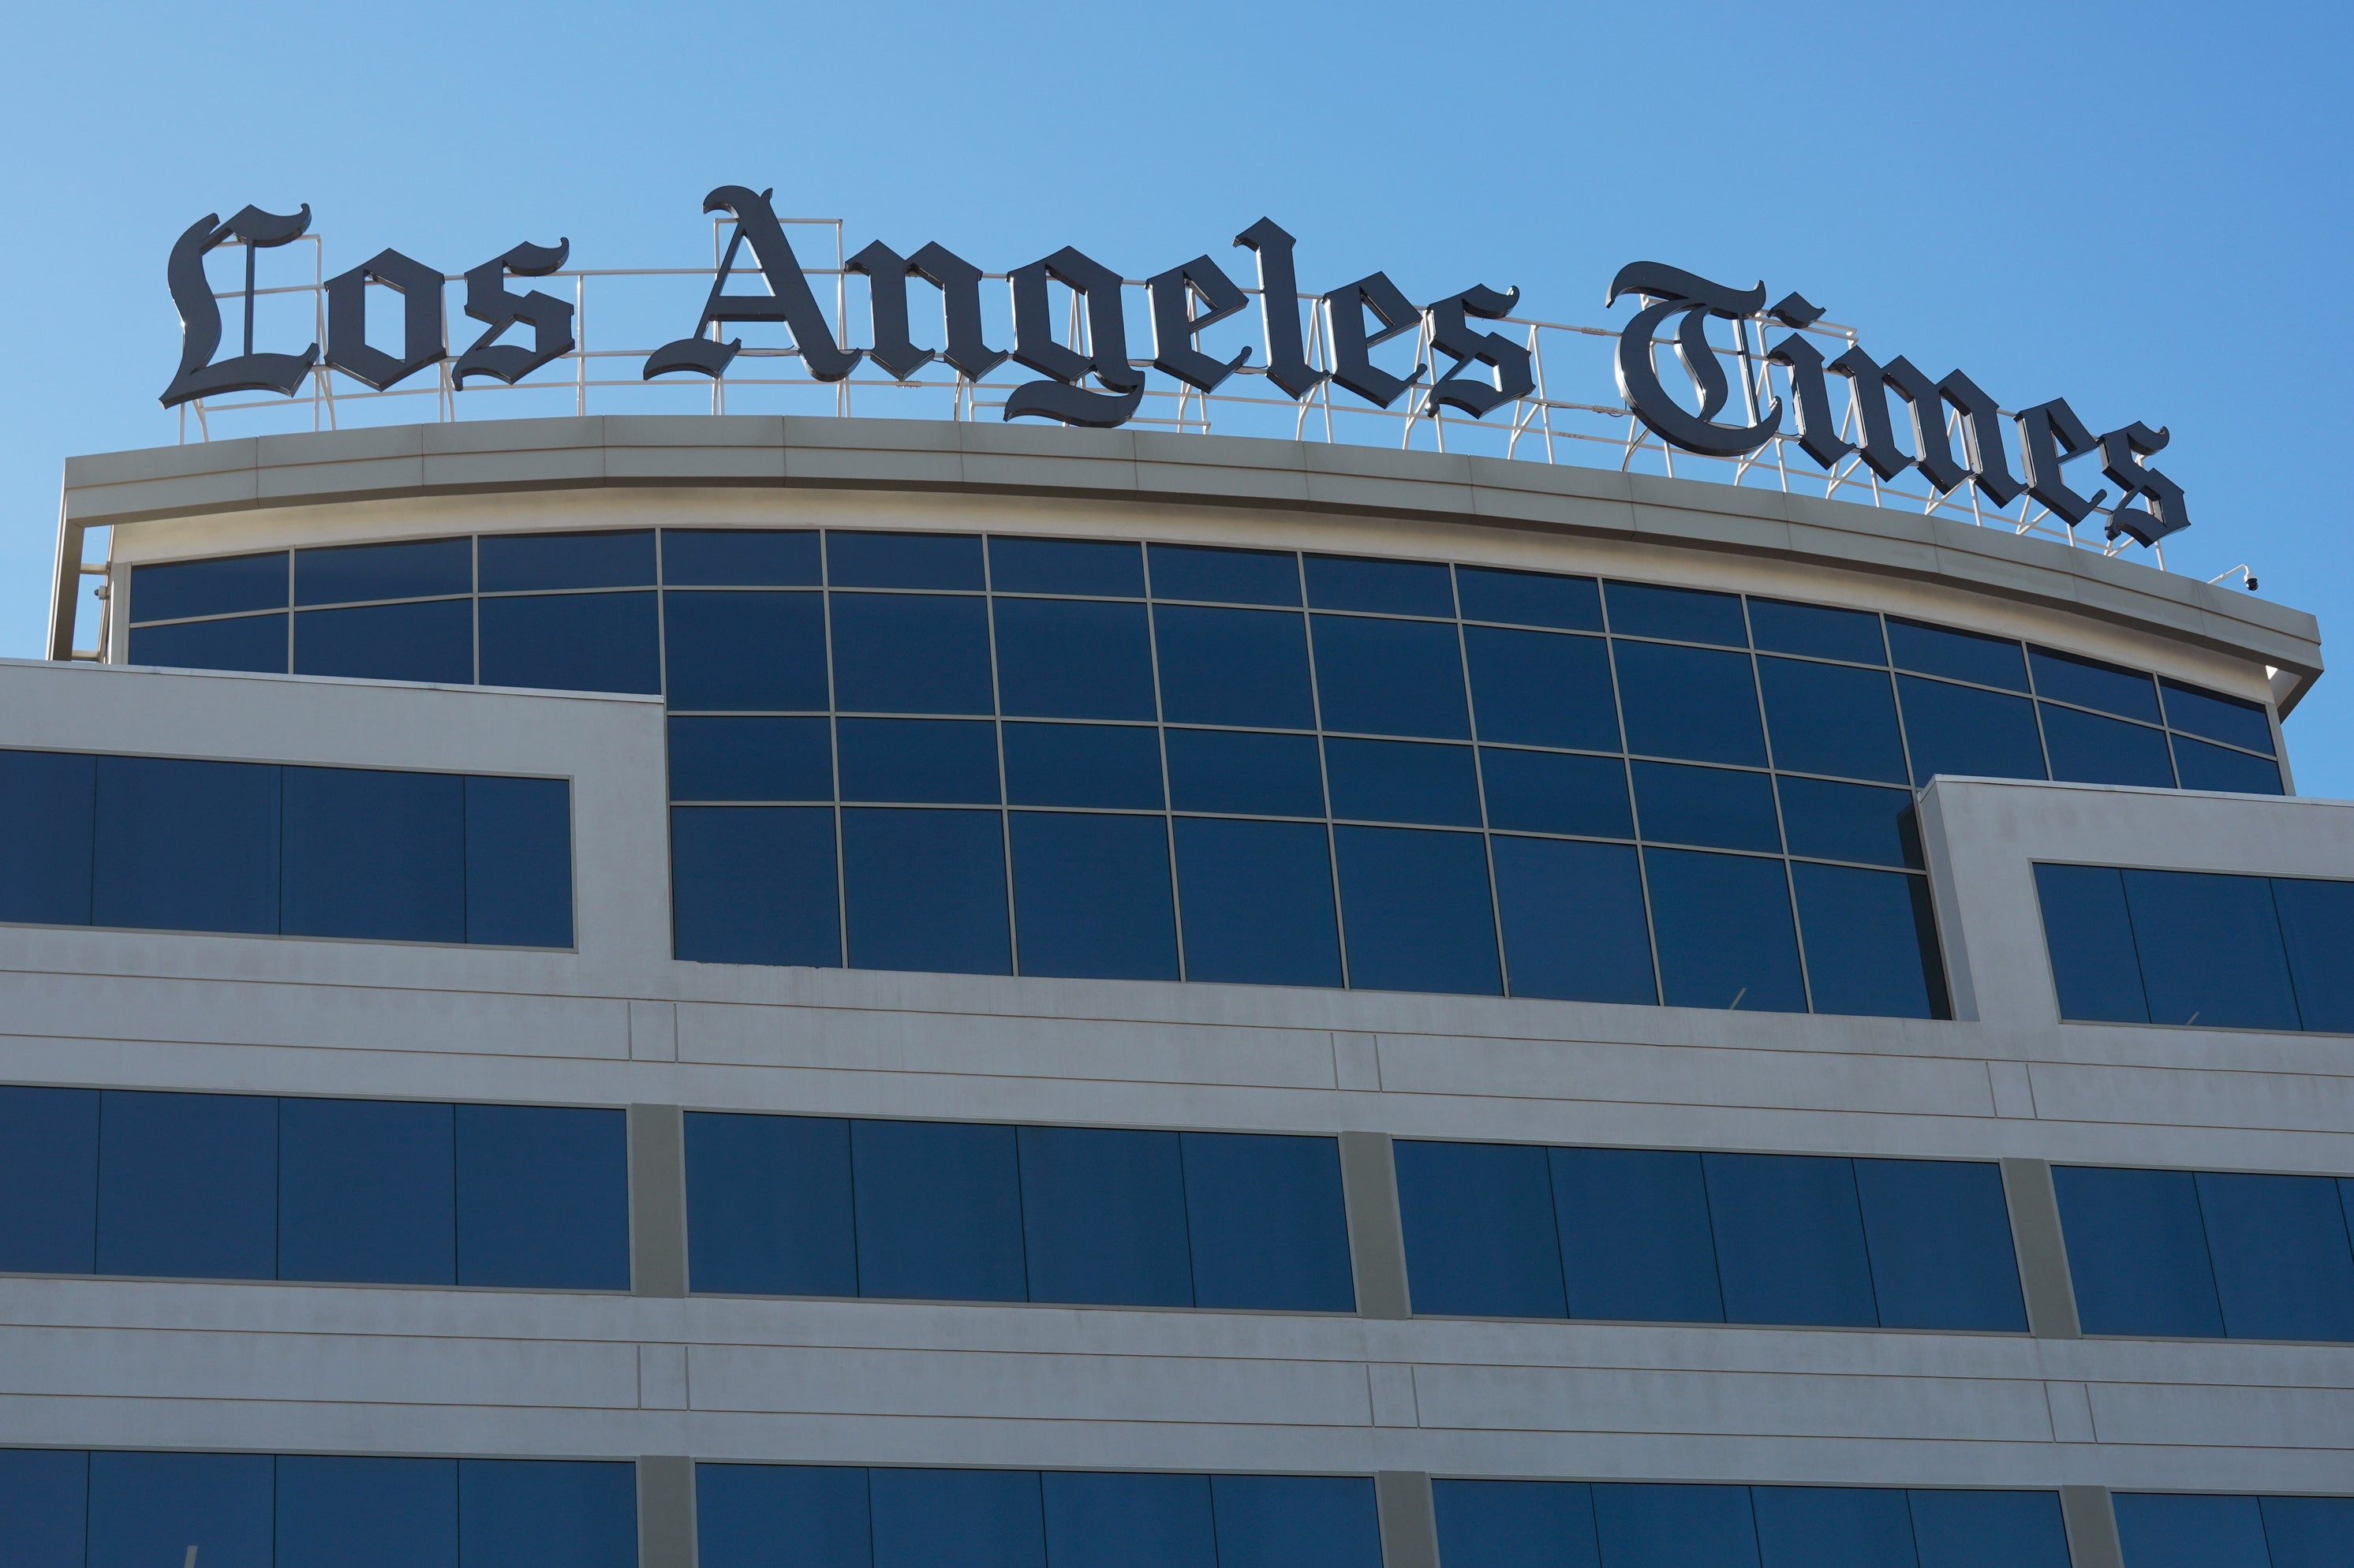 Los Angeles Times says it is laying off 115 staff